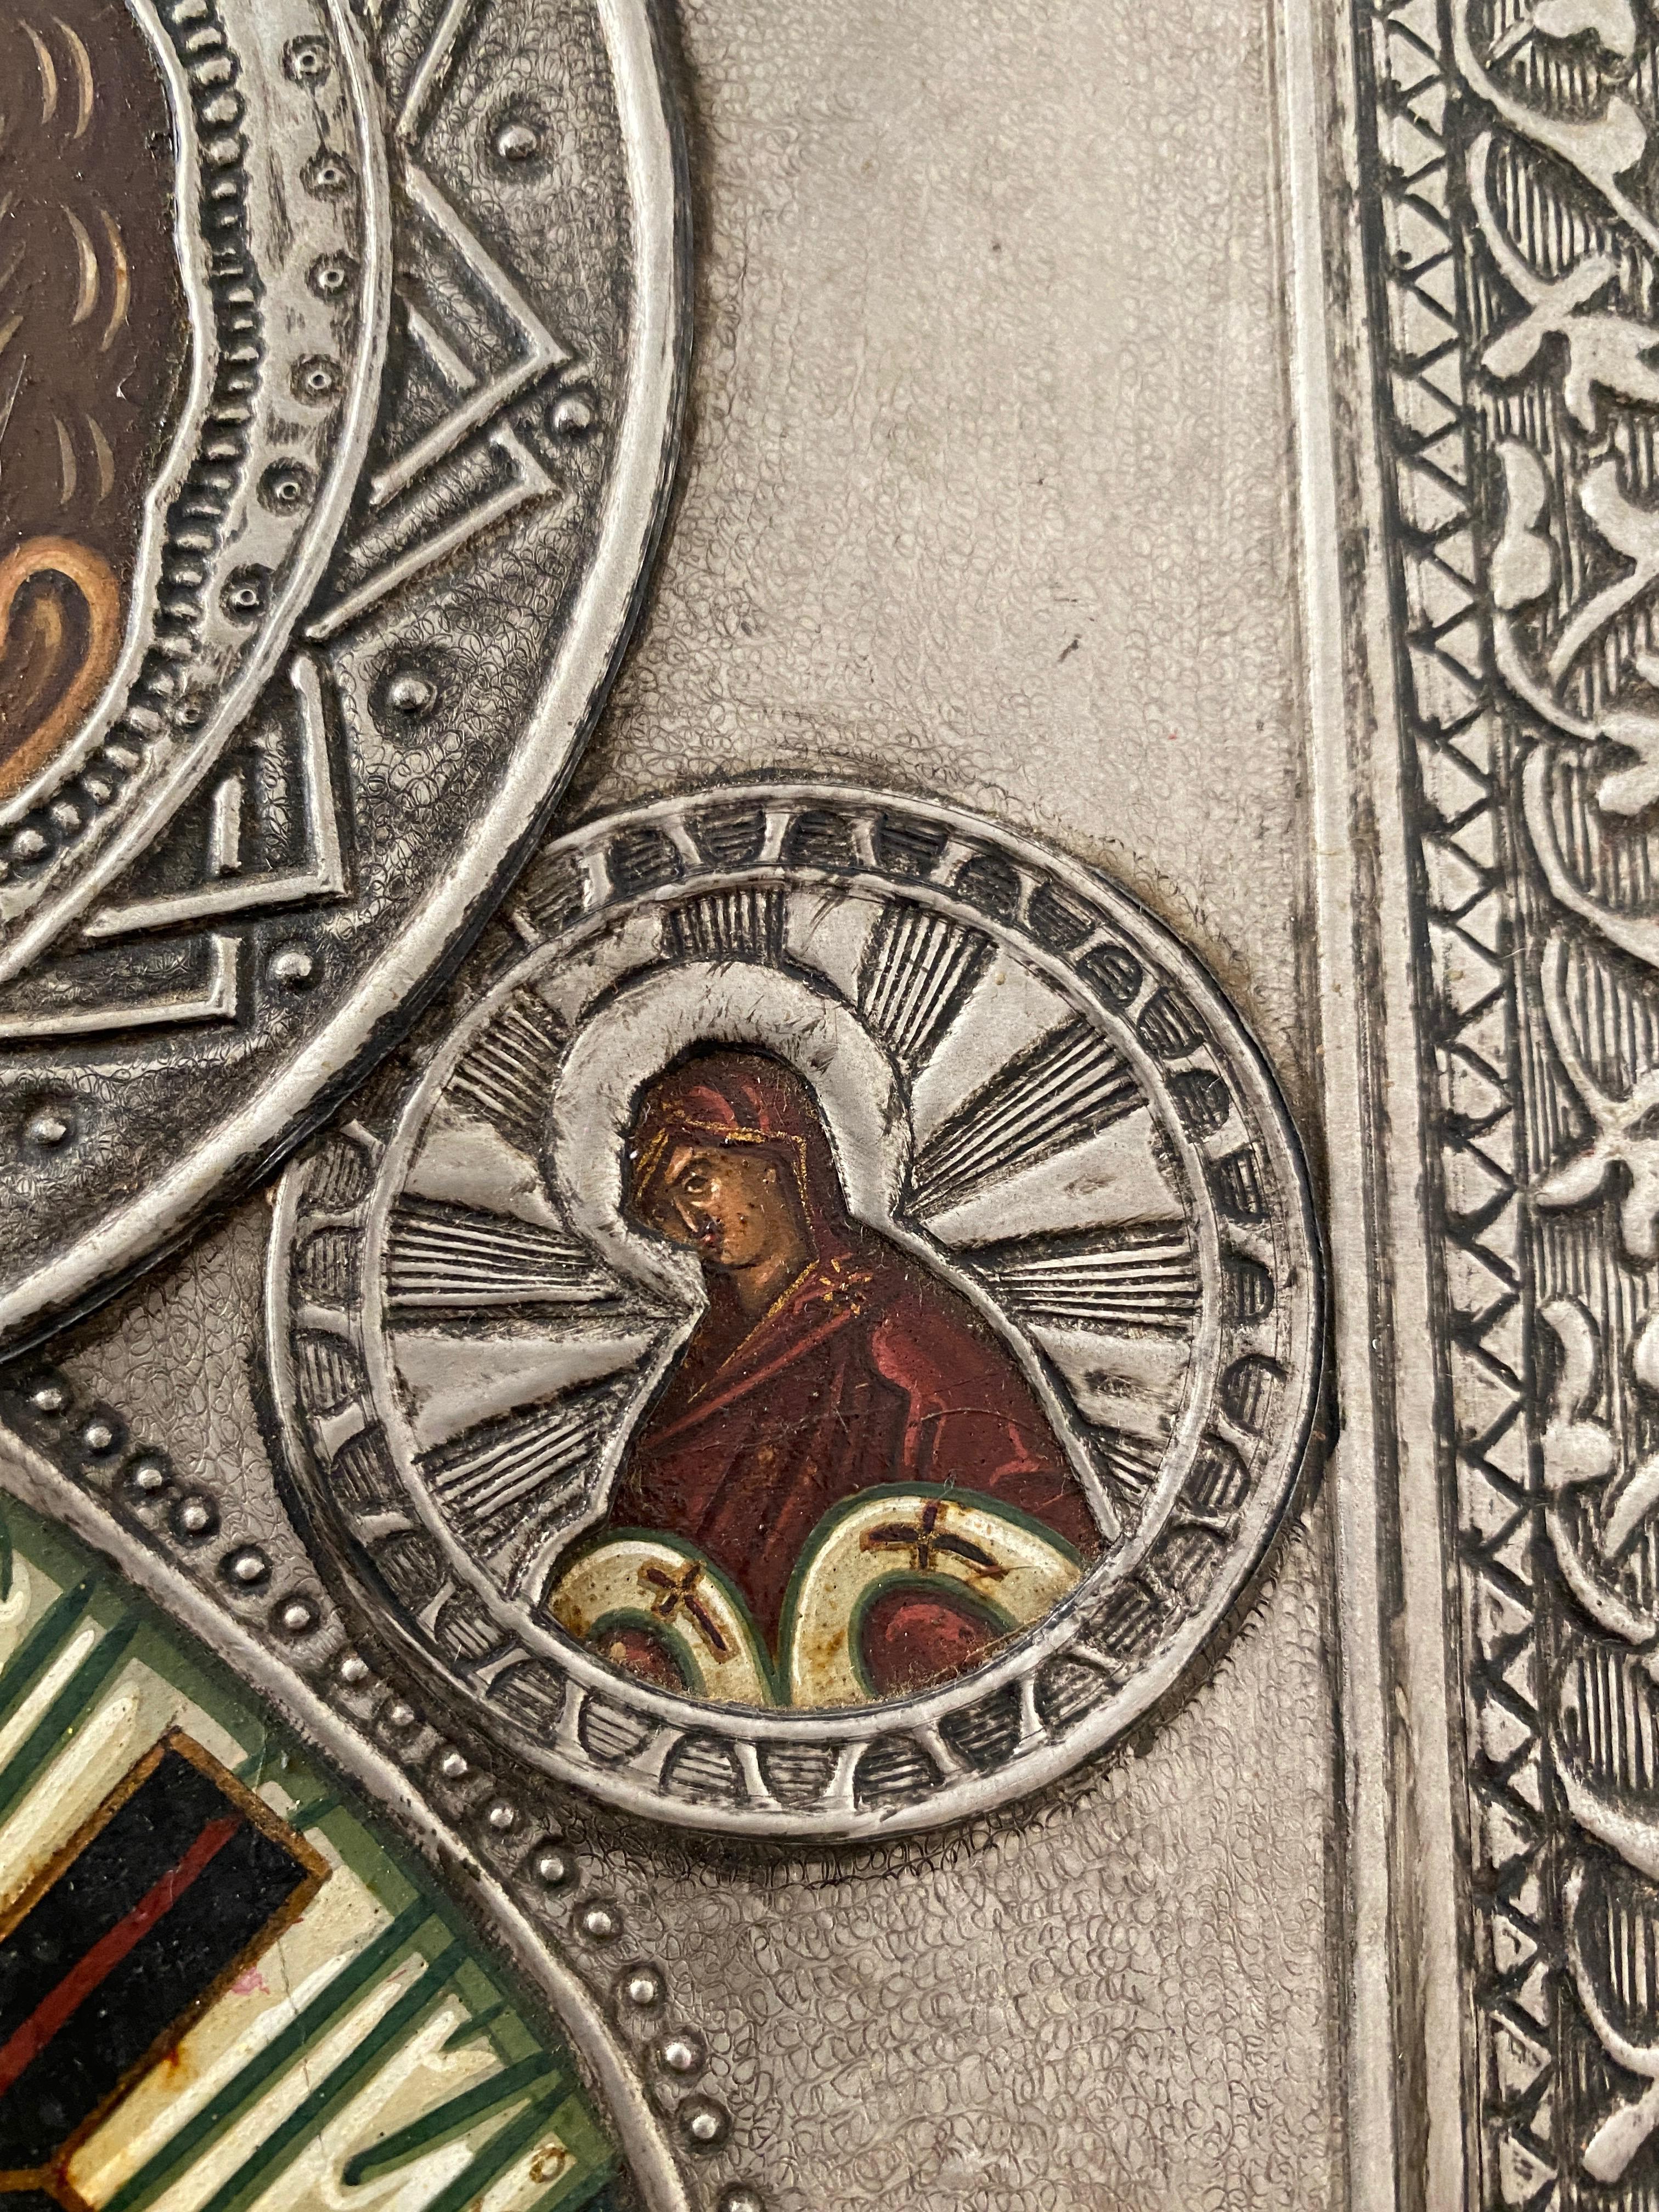 Icono of Saint Nicolas in the style of Russian icons of the 18th century. 
Egg tempera and gesso on wood, covered by a metal  oklad made by the artist himself. The oklad, in principle, were made to cover damaged parts of highly revered ancient